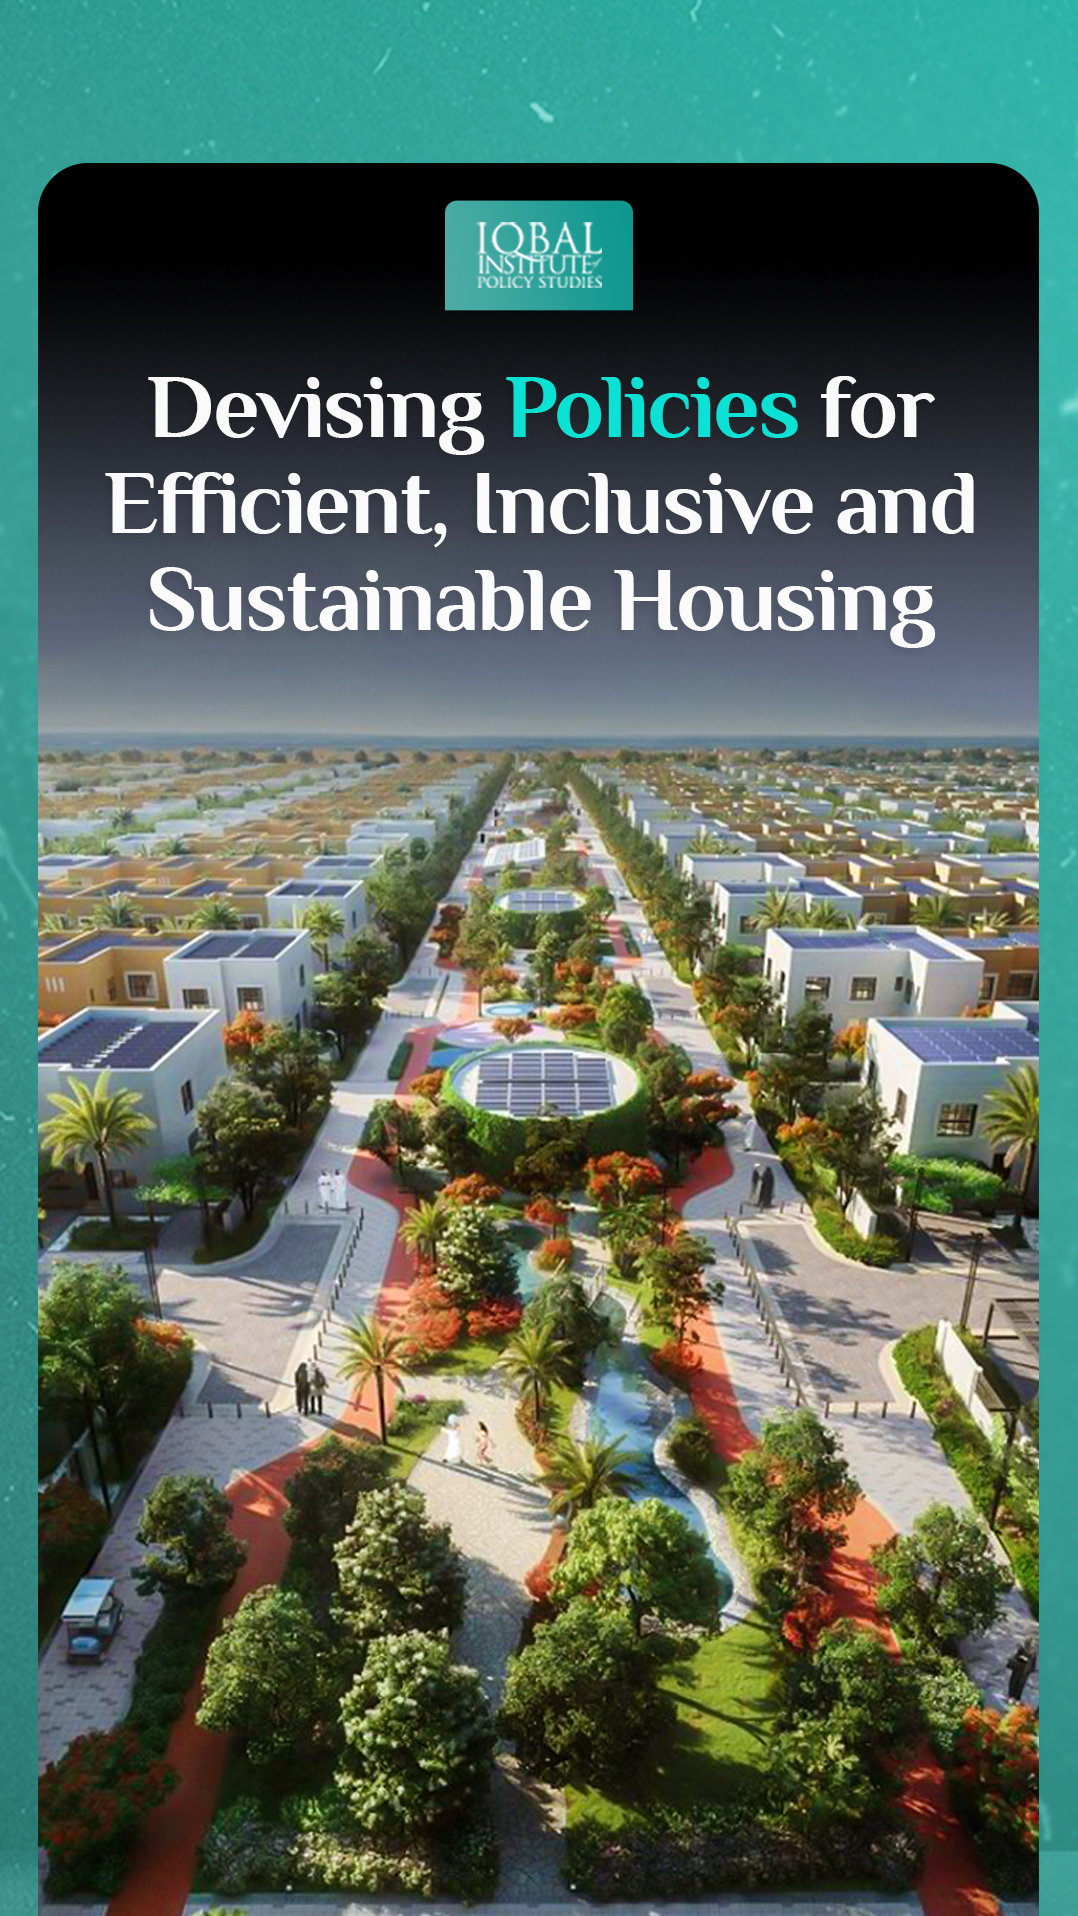 Devising Policies for Efficient, Inclusive, and Sustainable Housing